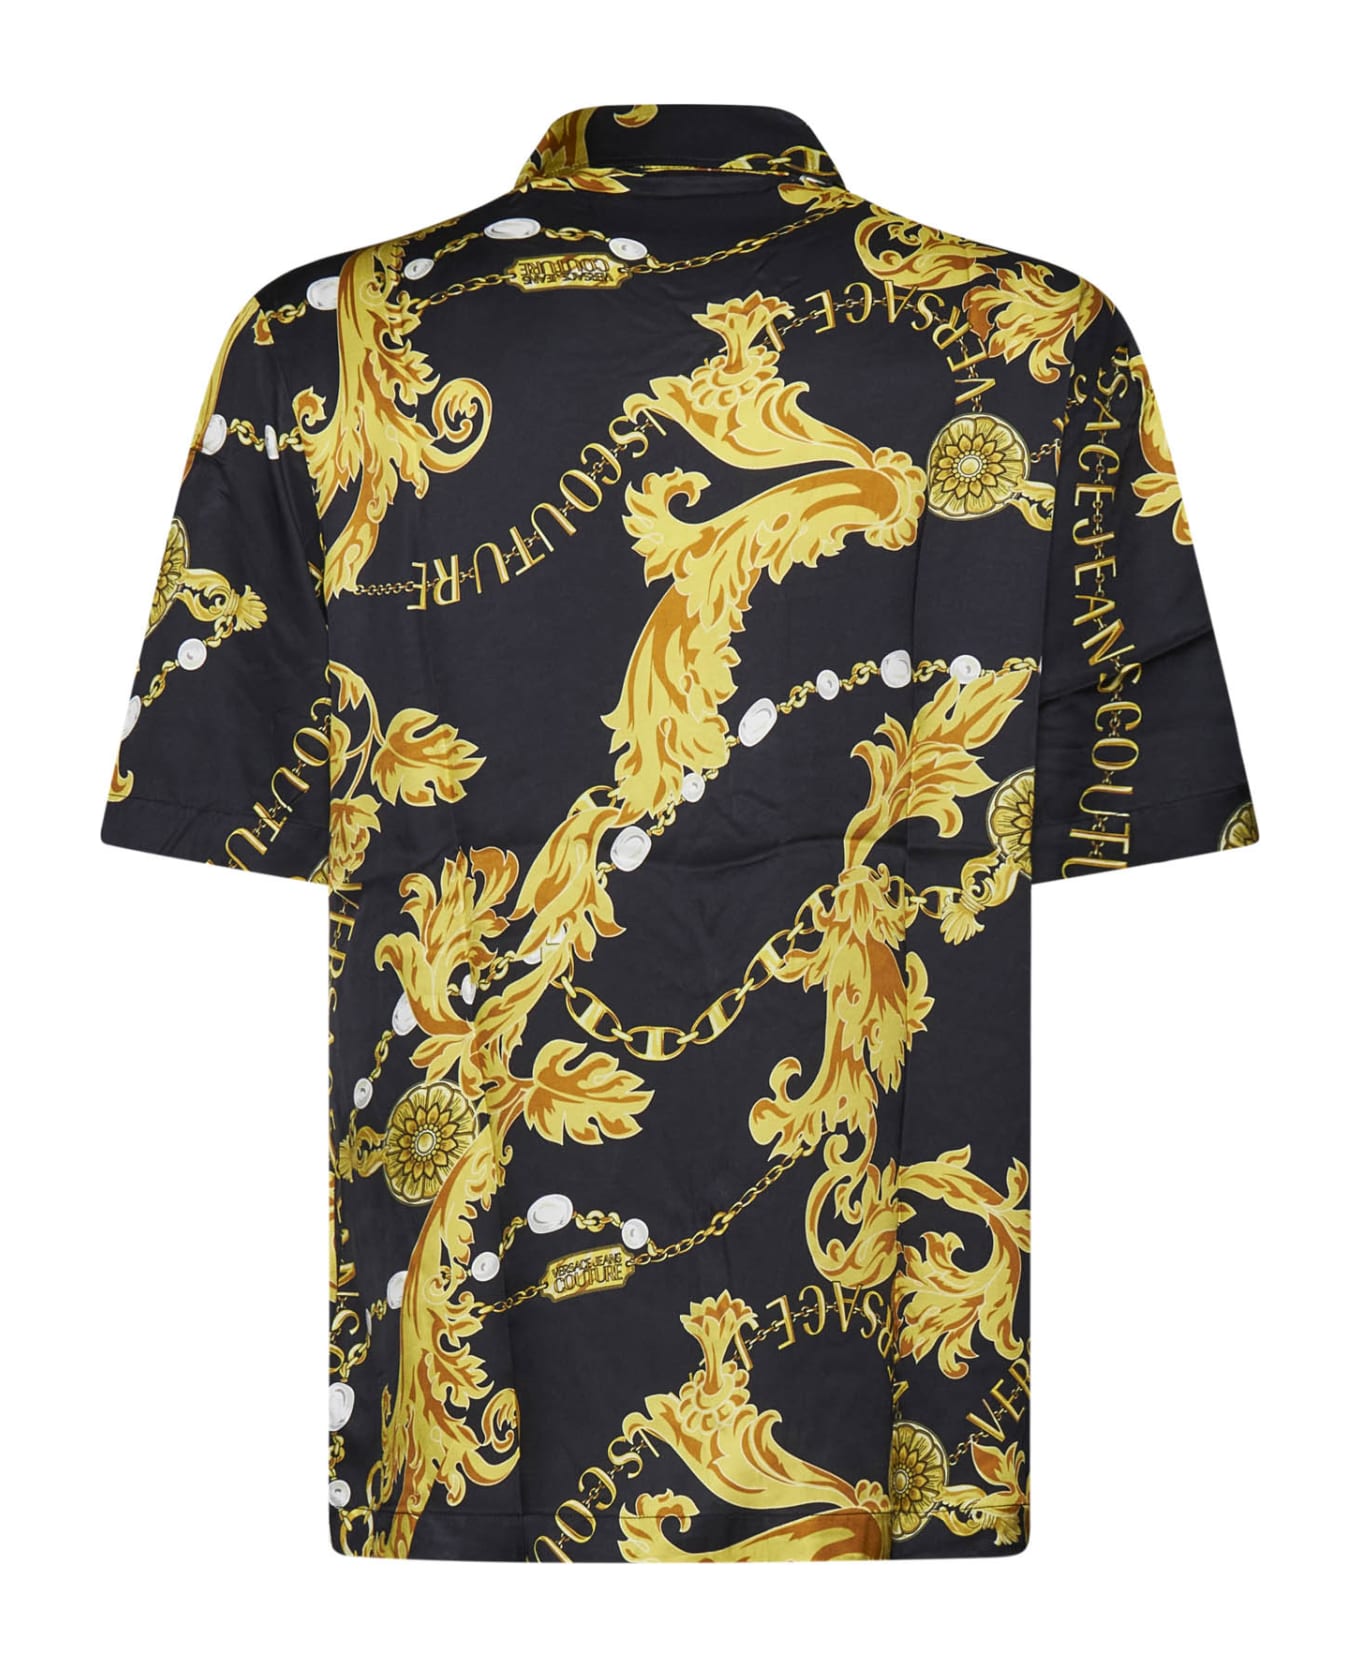 Versace Jeans Couture Baroque Print Shirt - Black gold シャツ